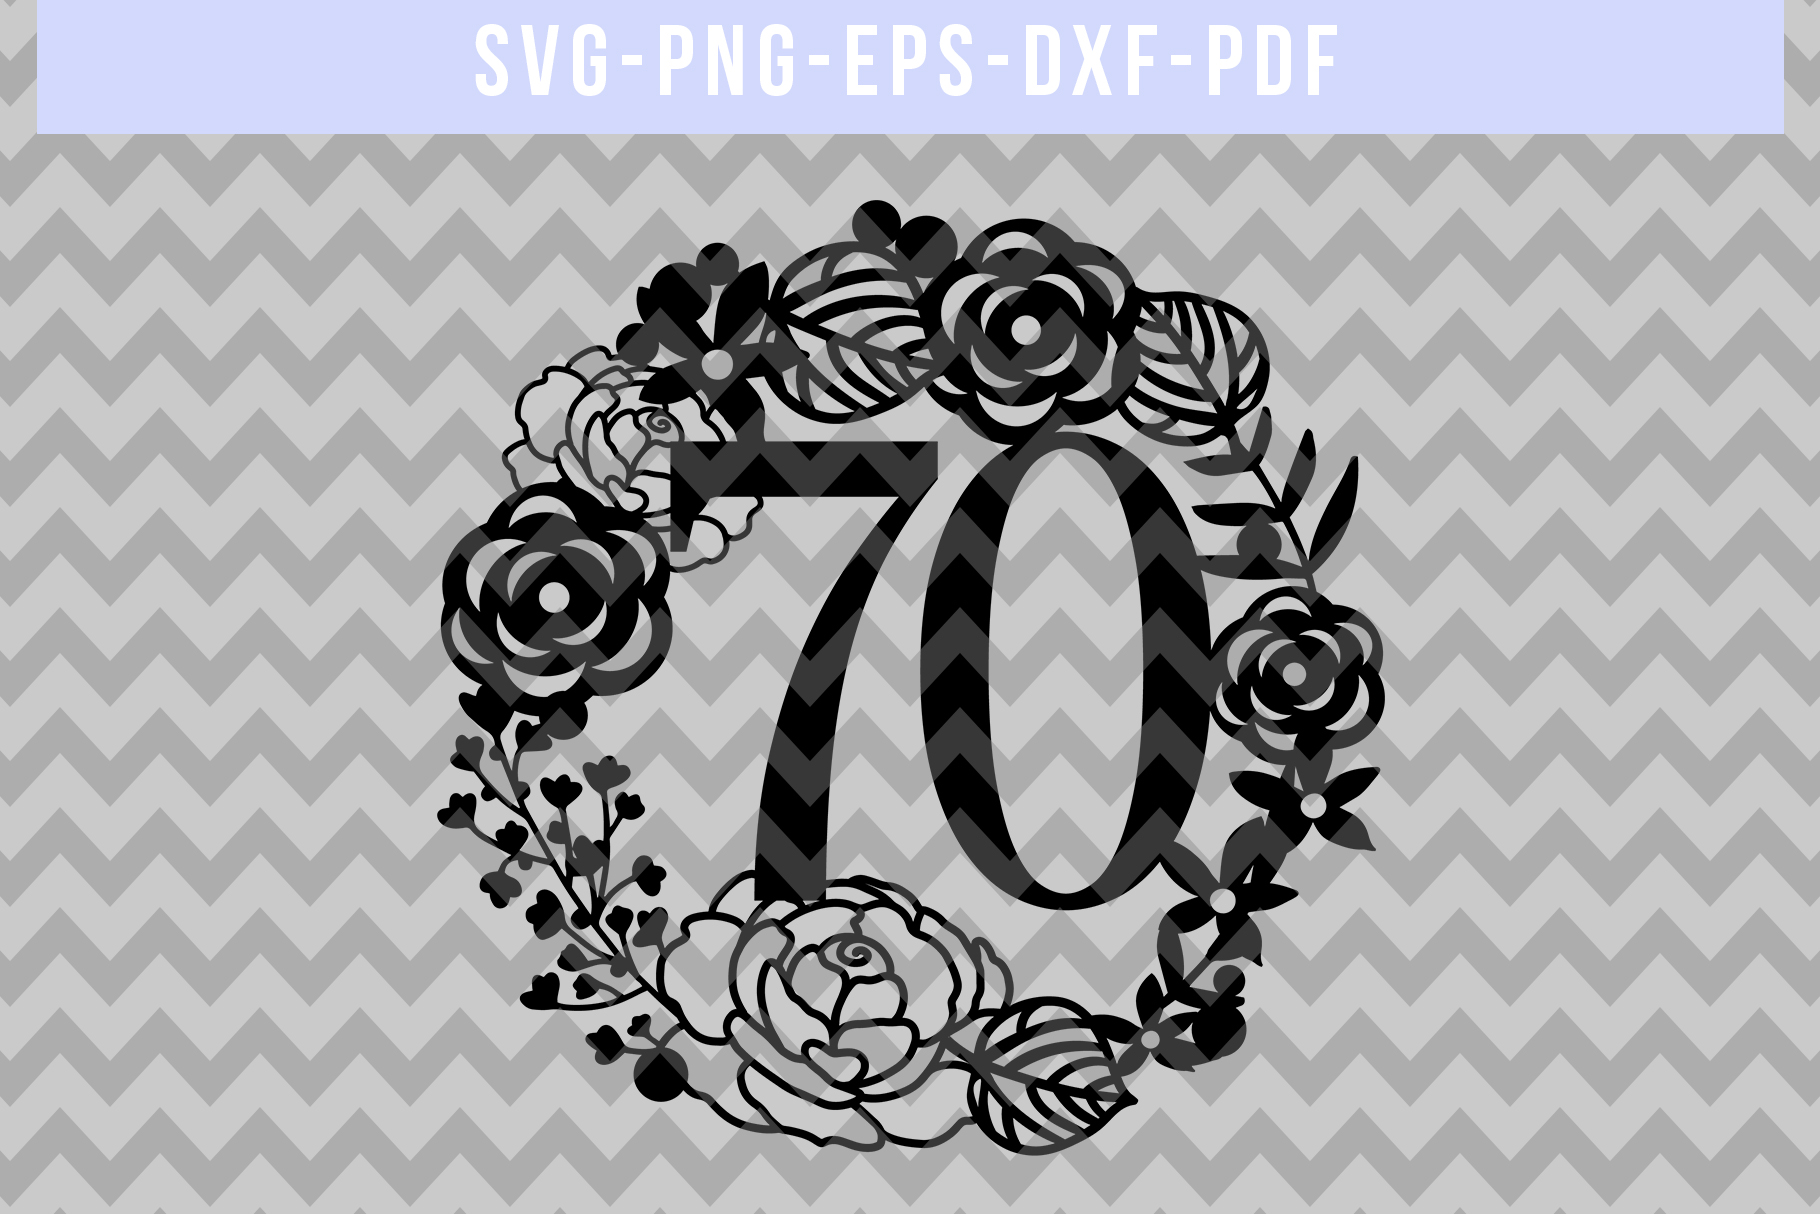 Download 70 Birthday Wreath Papercut Template, 70th Birthday, SVG, PD